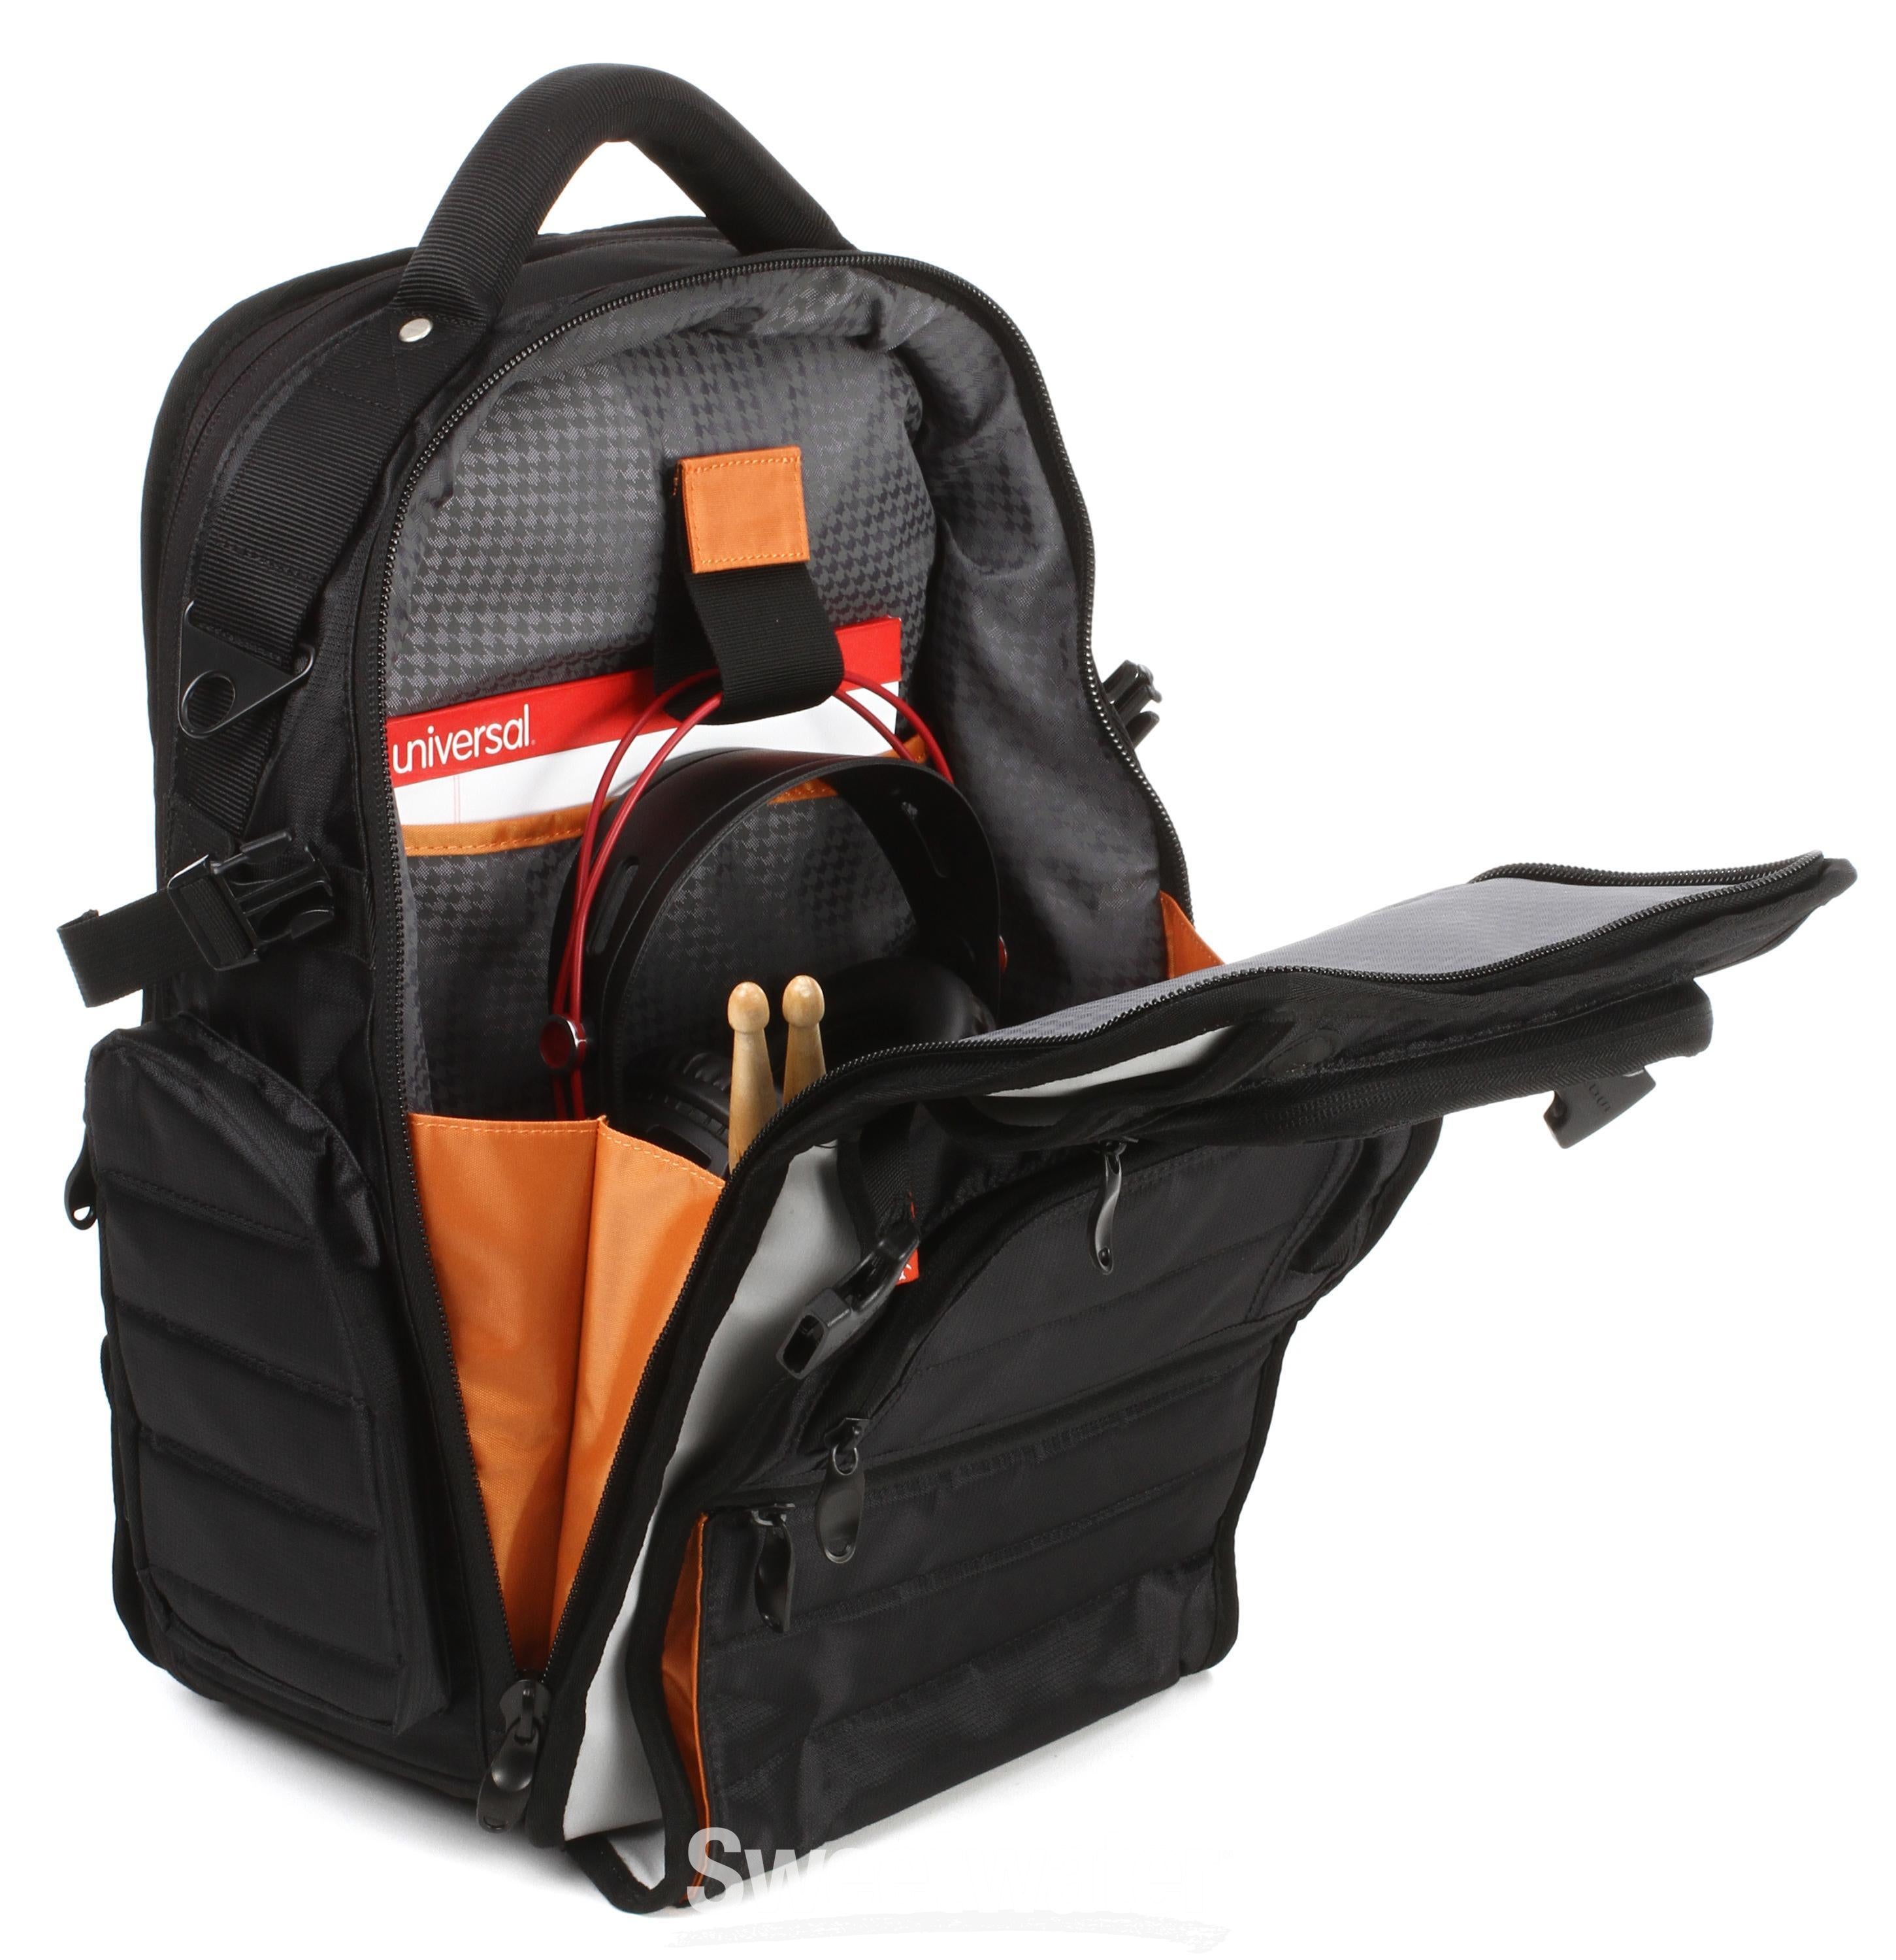 MONO Classic FlyBy Backpack with Break-away Laptop Bag | Sweetwater